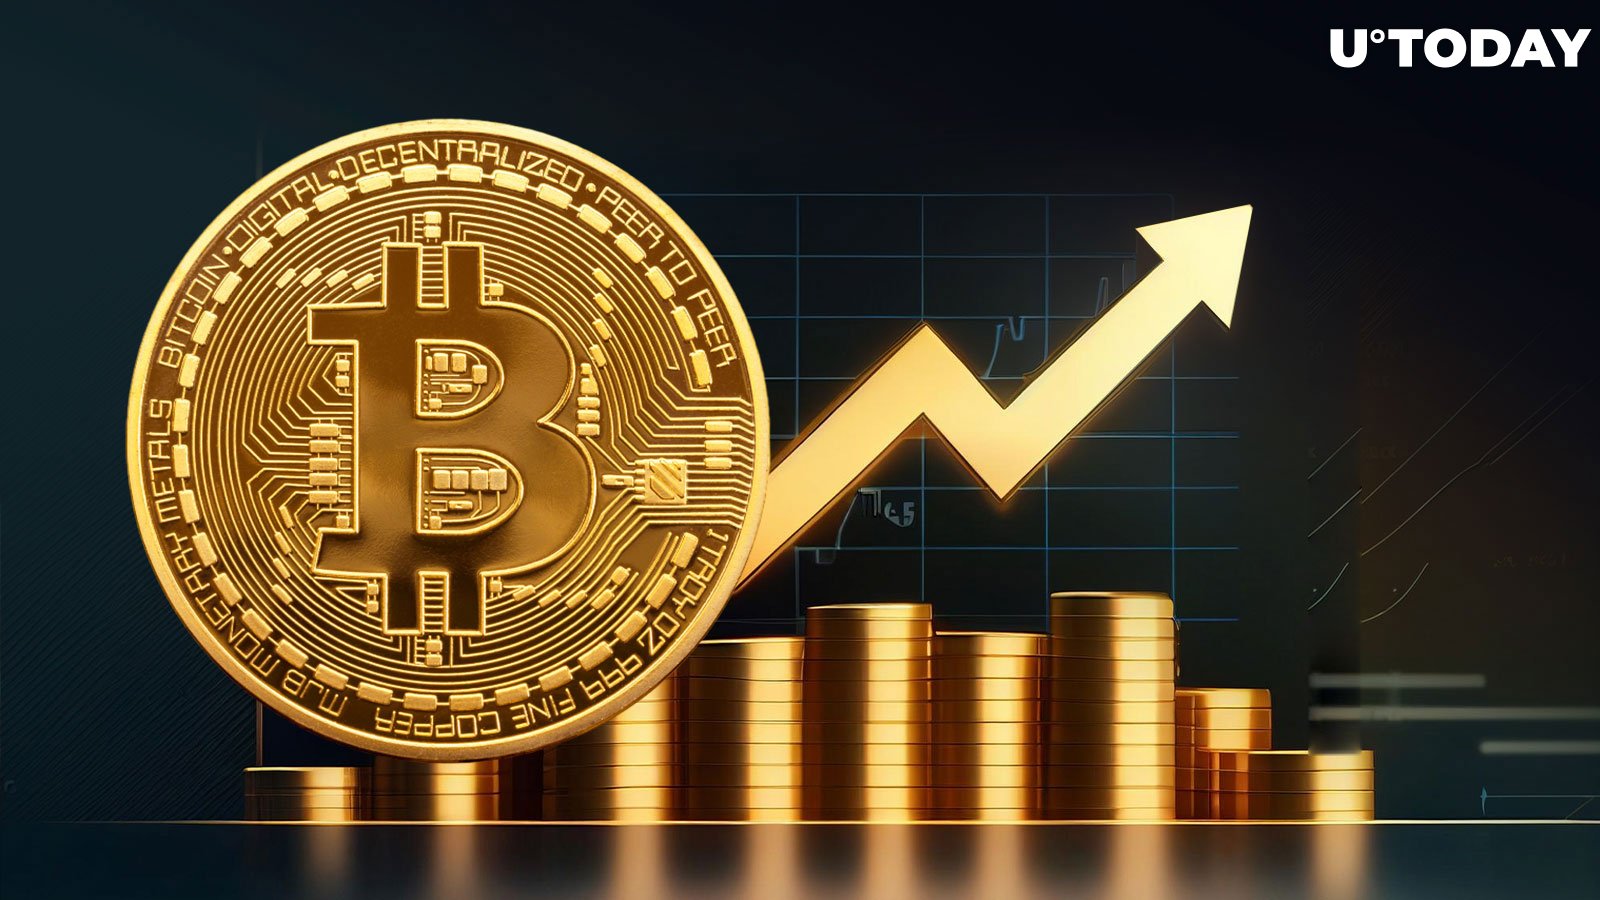 Bitcoin (BTC) Price Ready for Breakout, Top Trader Says